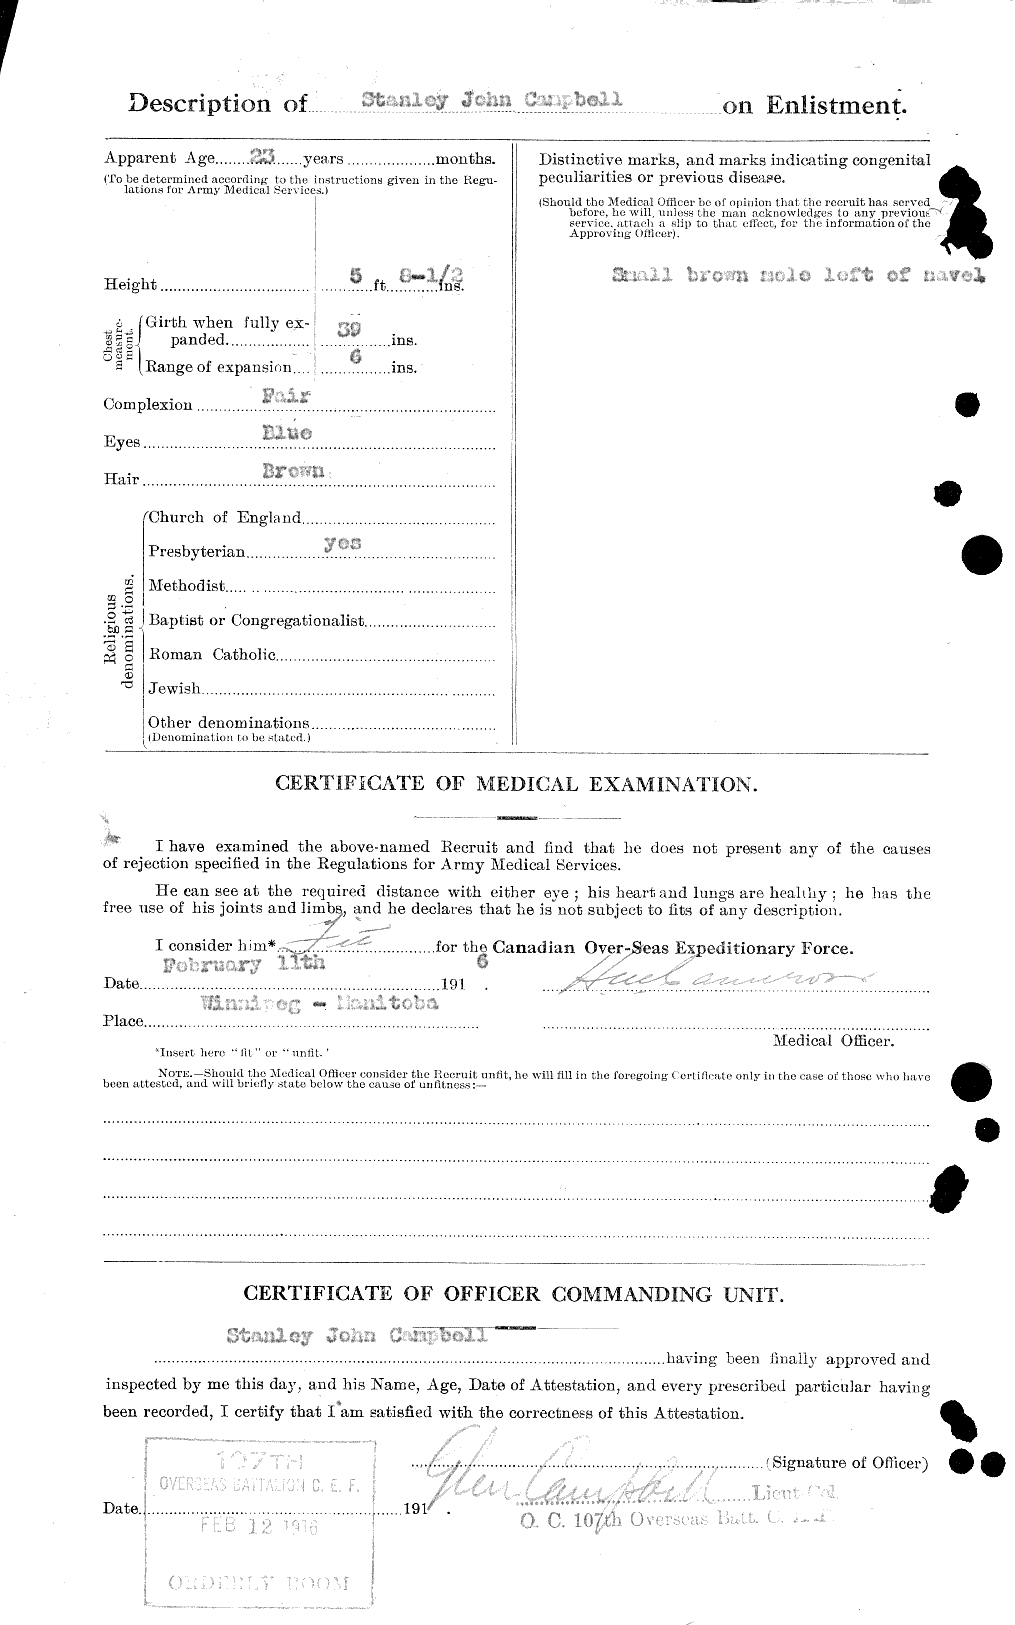 Personnel Records of the First World War - CEF 003982b